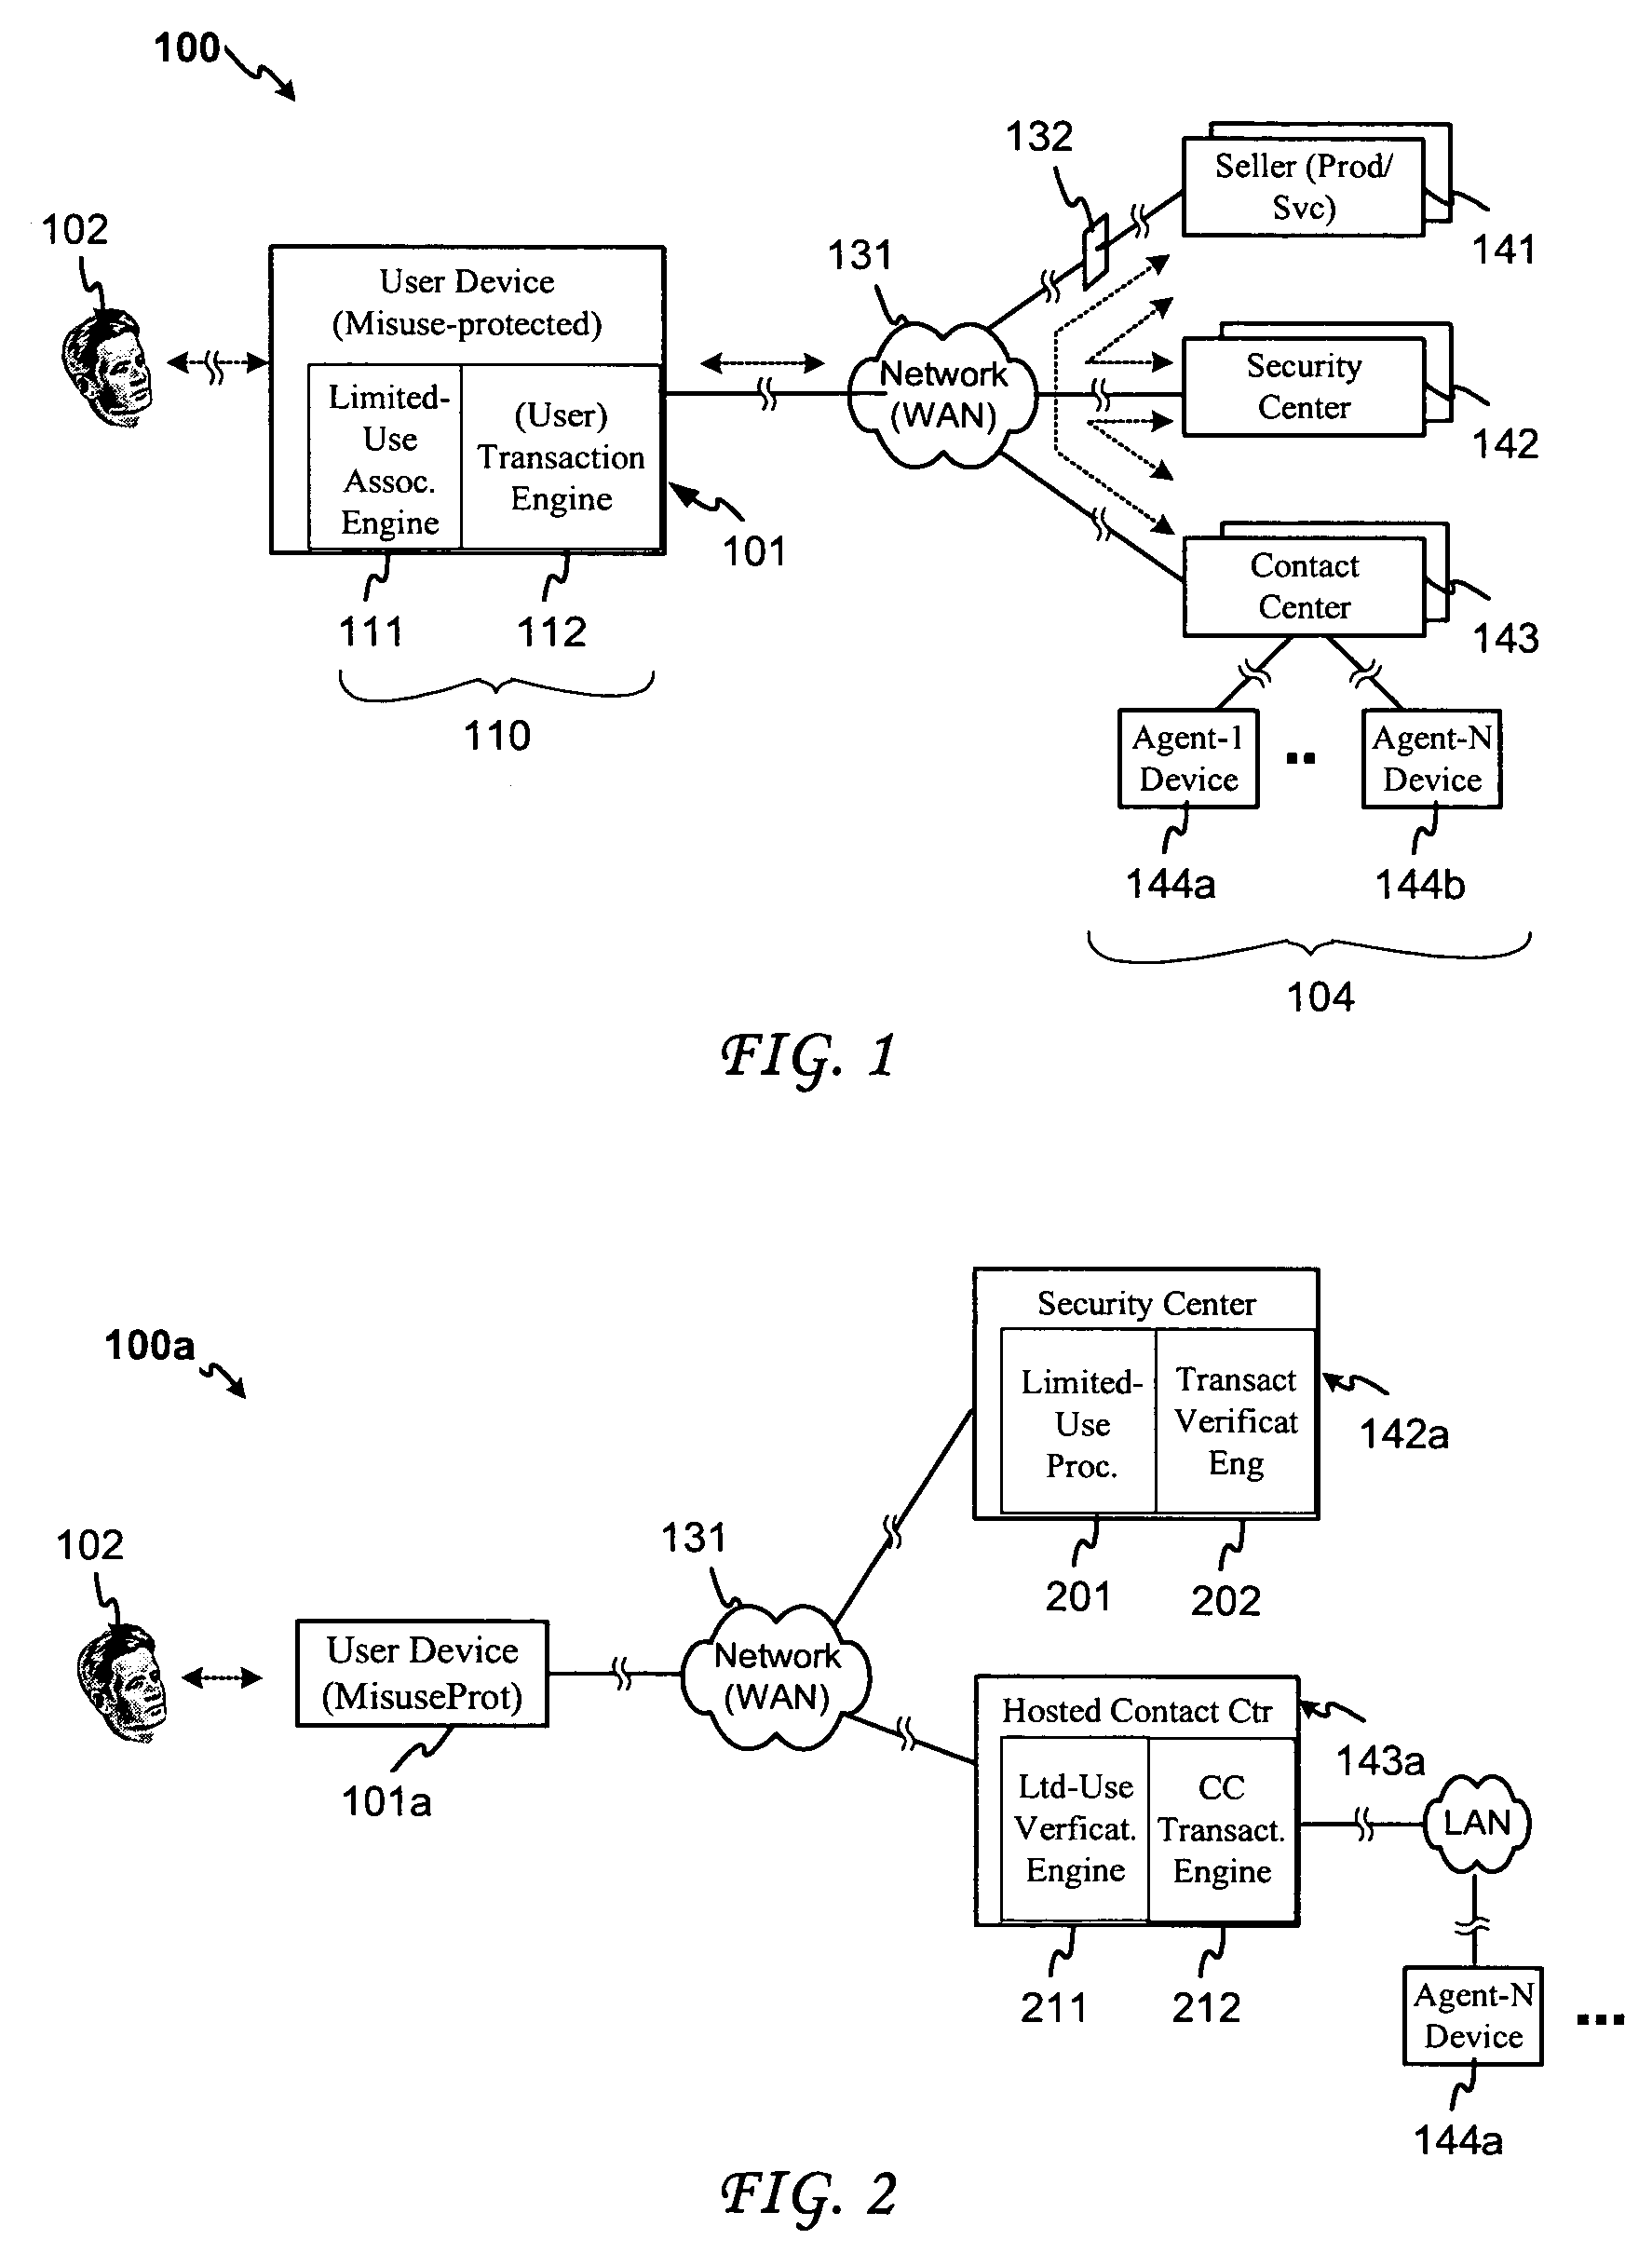 System and method for securing transactions in a contact center environment